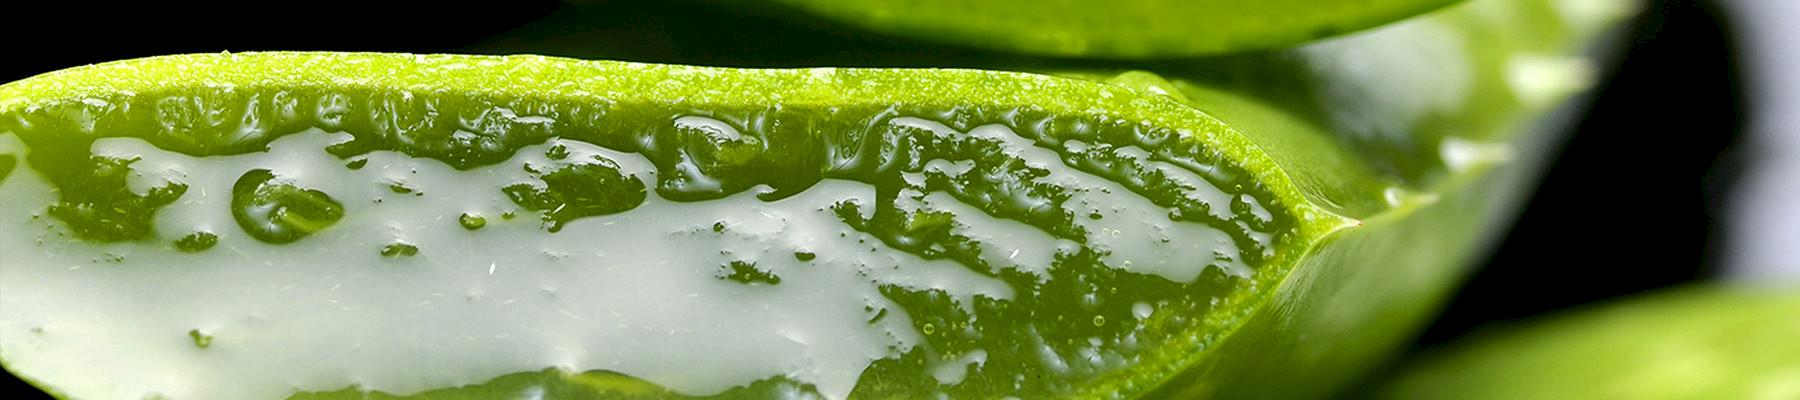 Aloe Aloe ferox, widely used throughout cosmetics and health products much of which is collected from the wild